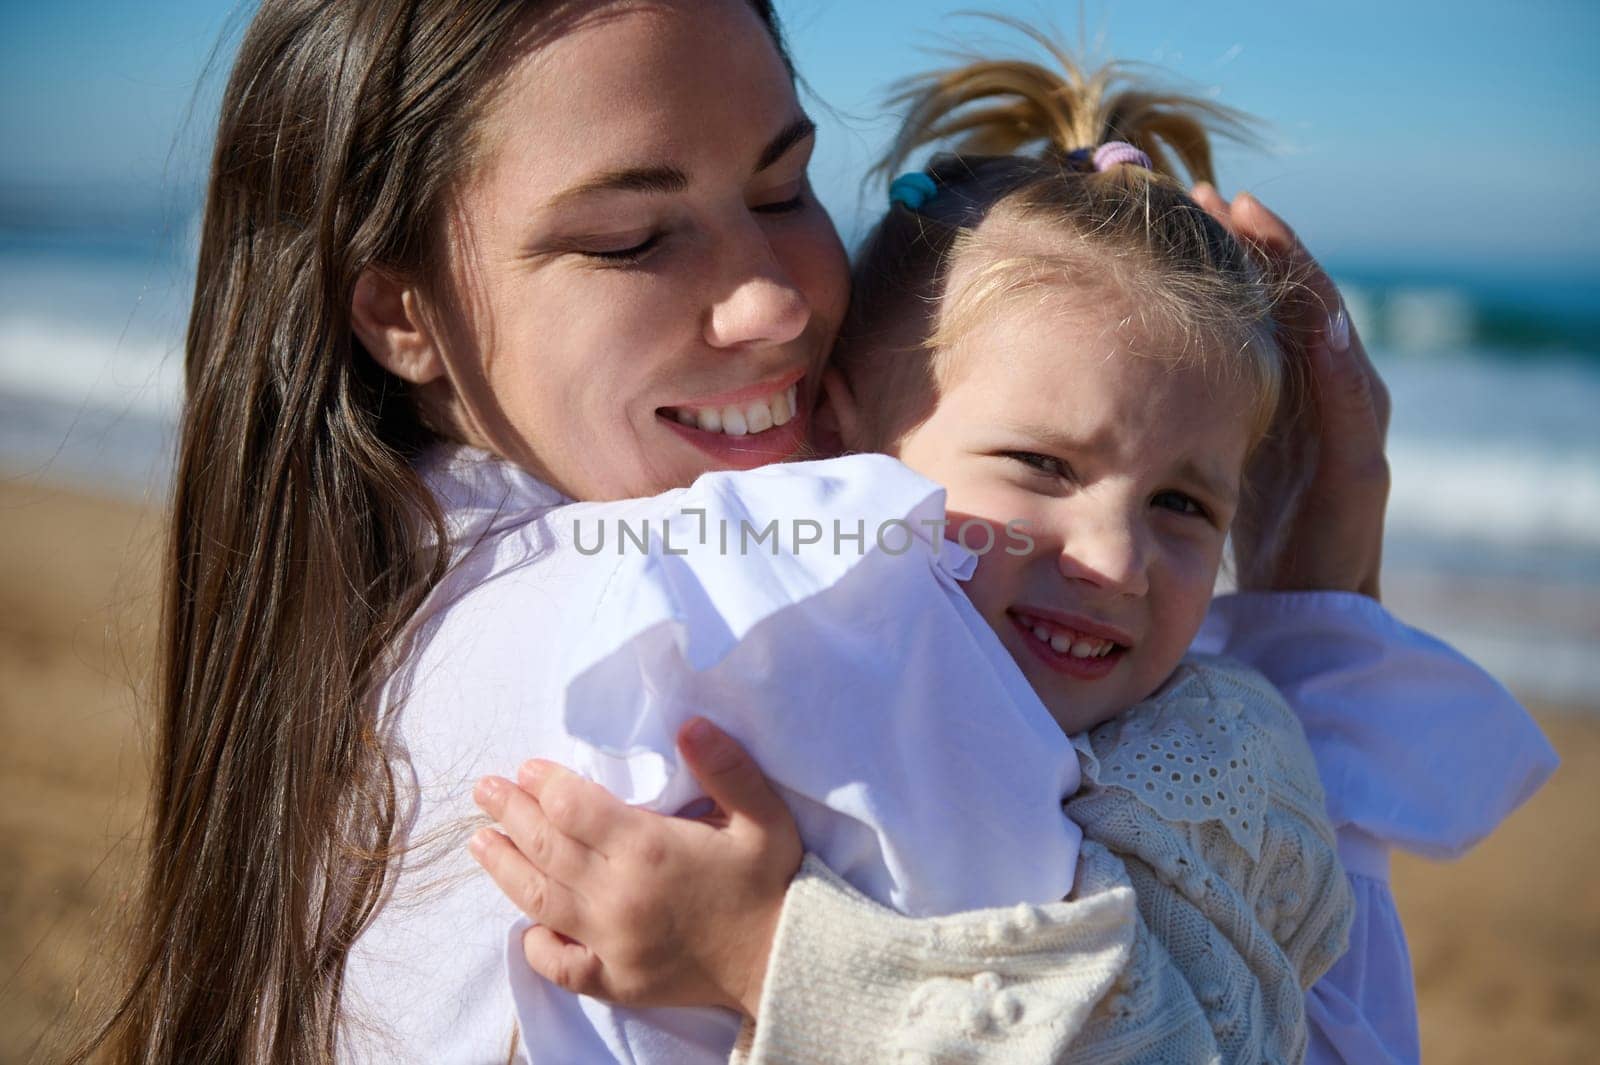 Close up portrait of authentic happy woman, young mother smiling and hugging her adorable little child girl, standing on the sandy beach together. People. Happy carefree childhood. Maternity concept